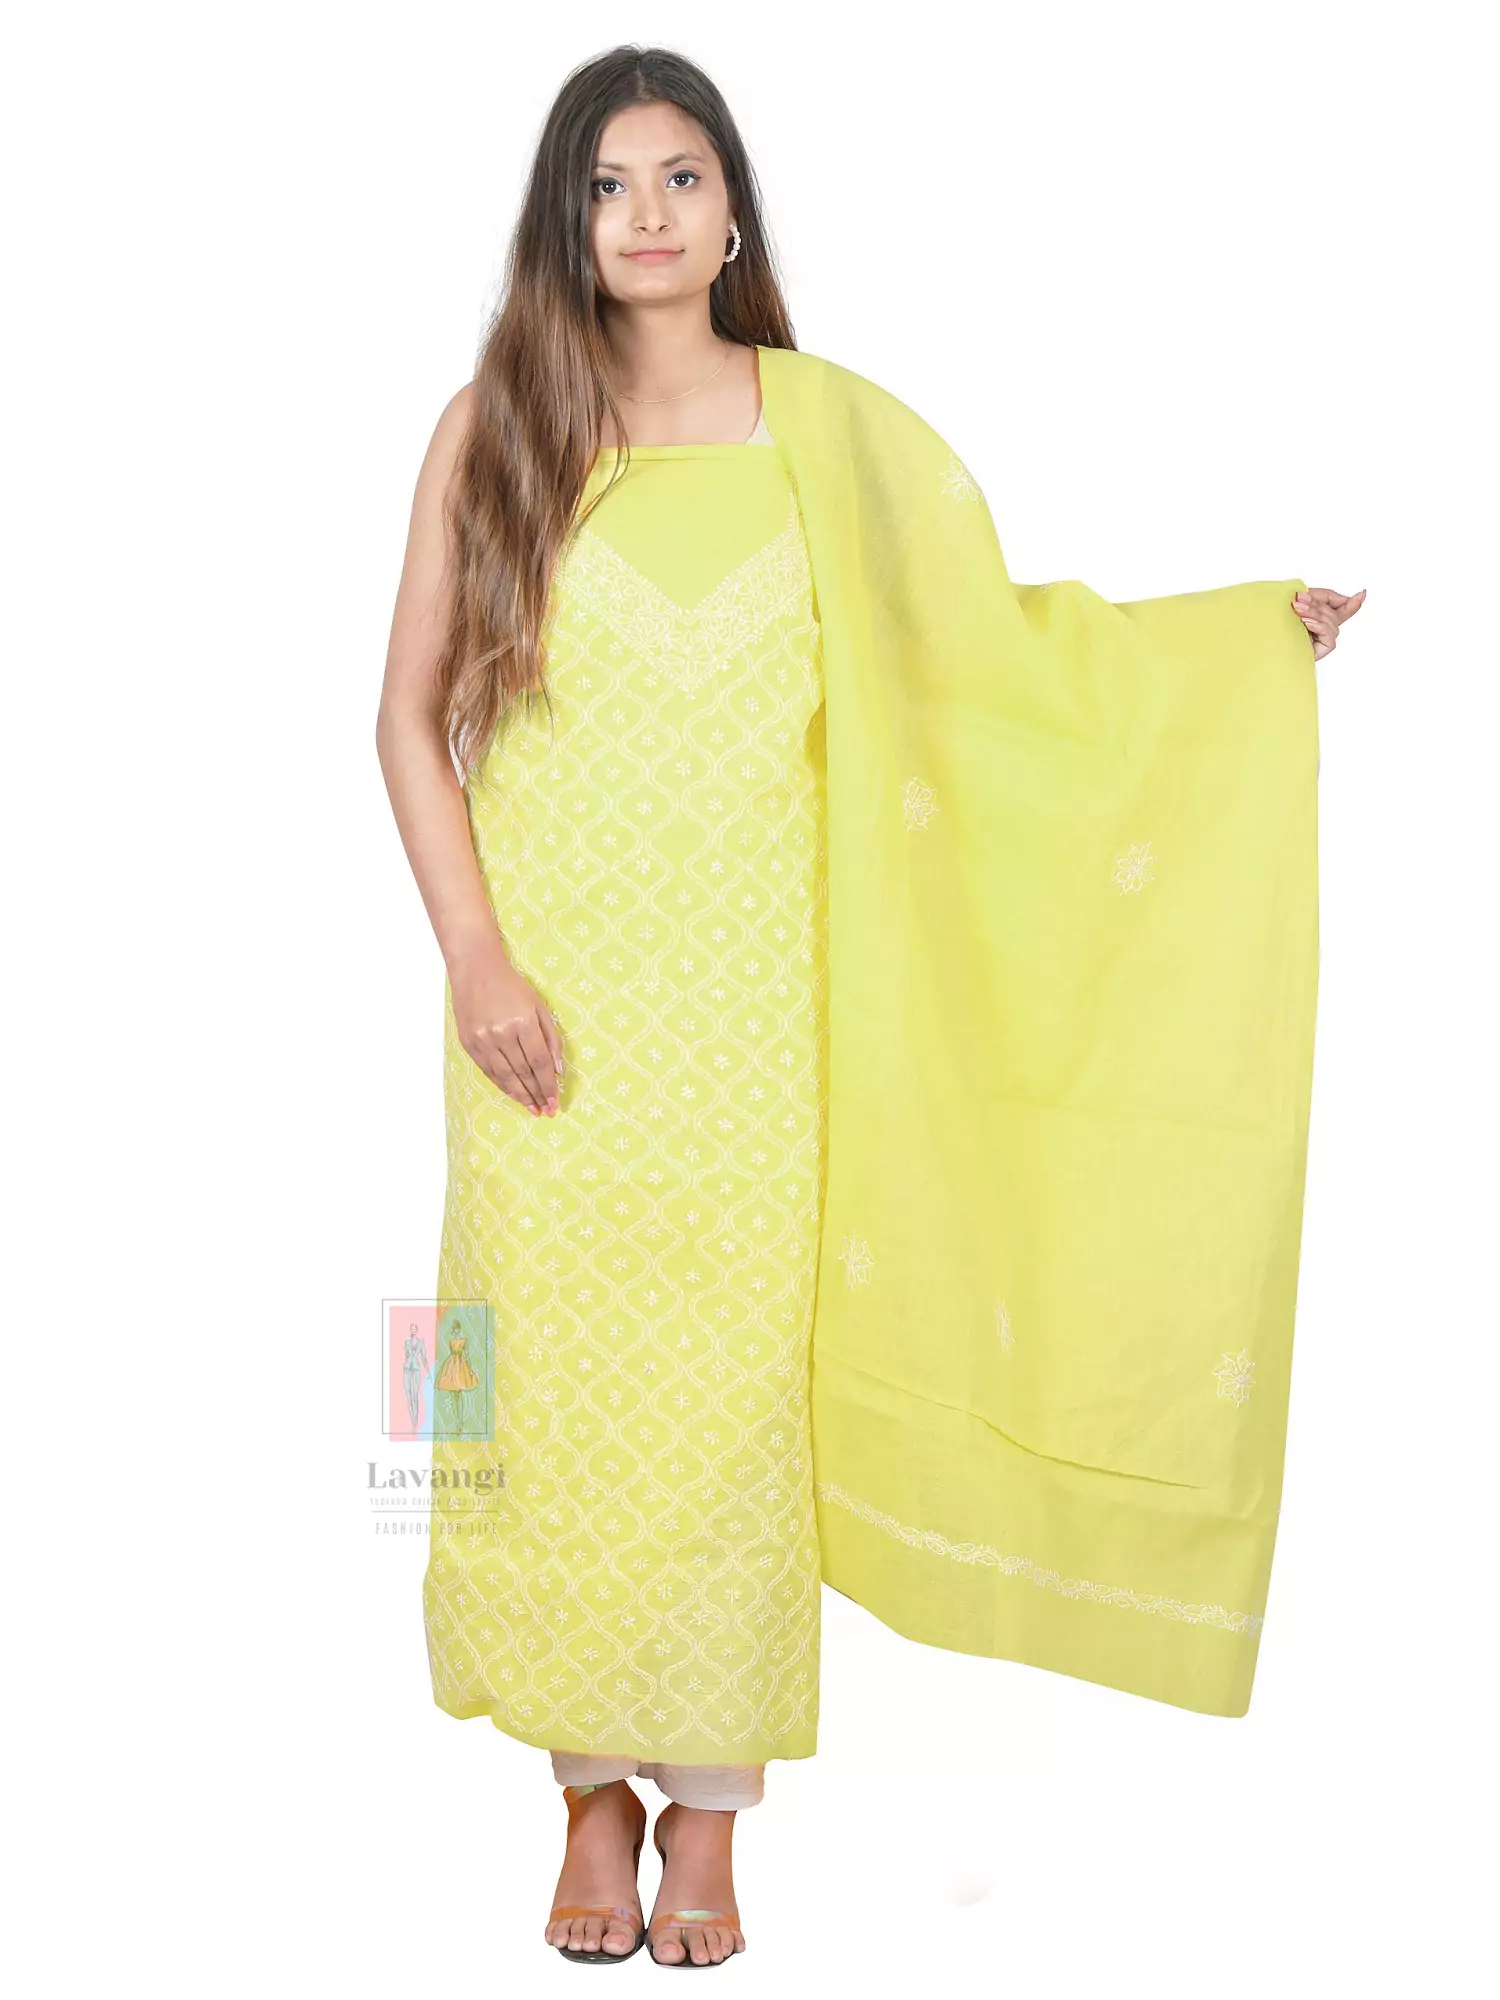 Lavangi Lucknow Chikan Yellow Anda Jaal Unstitched Cotton Dress Material